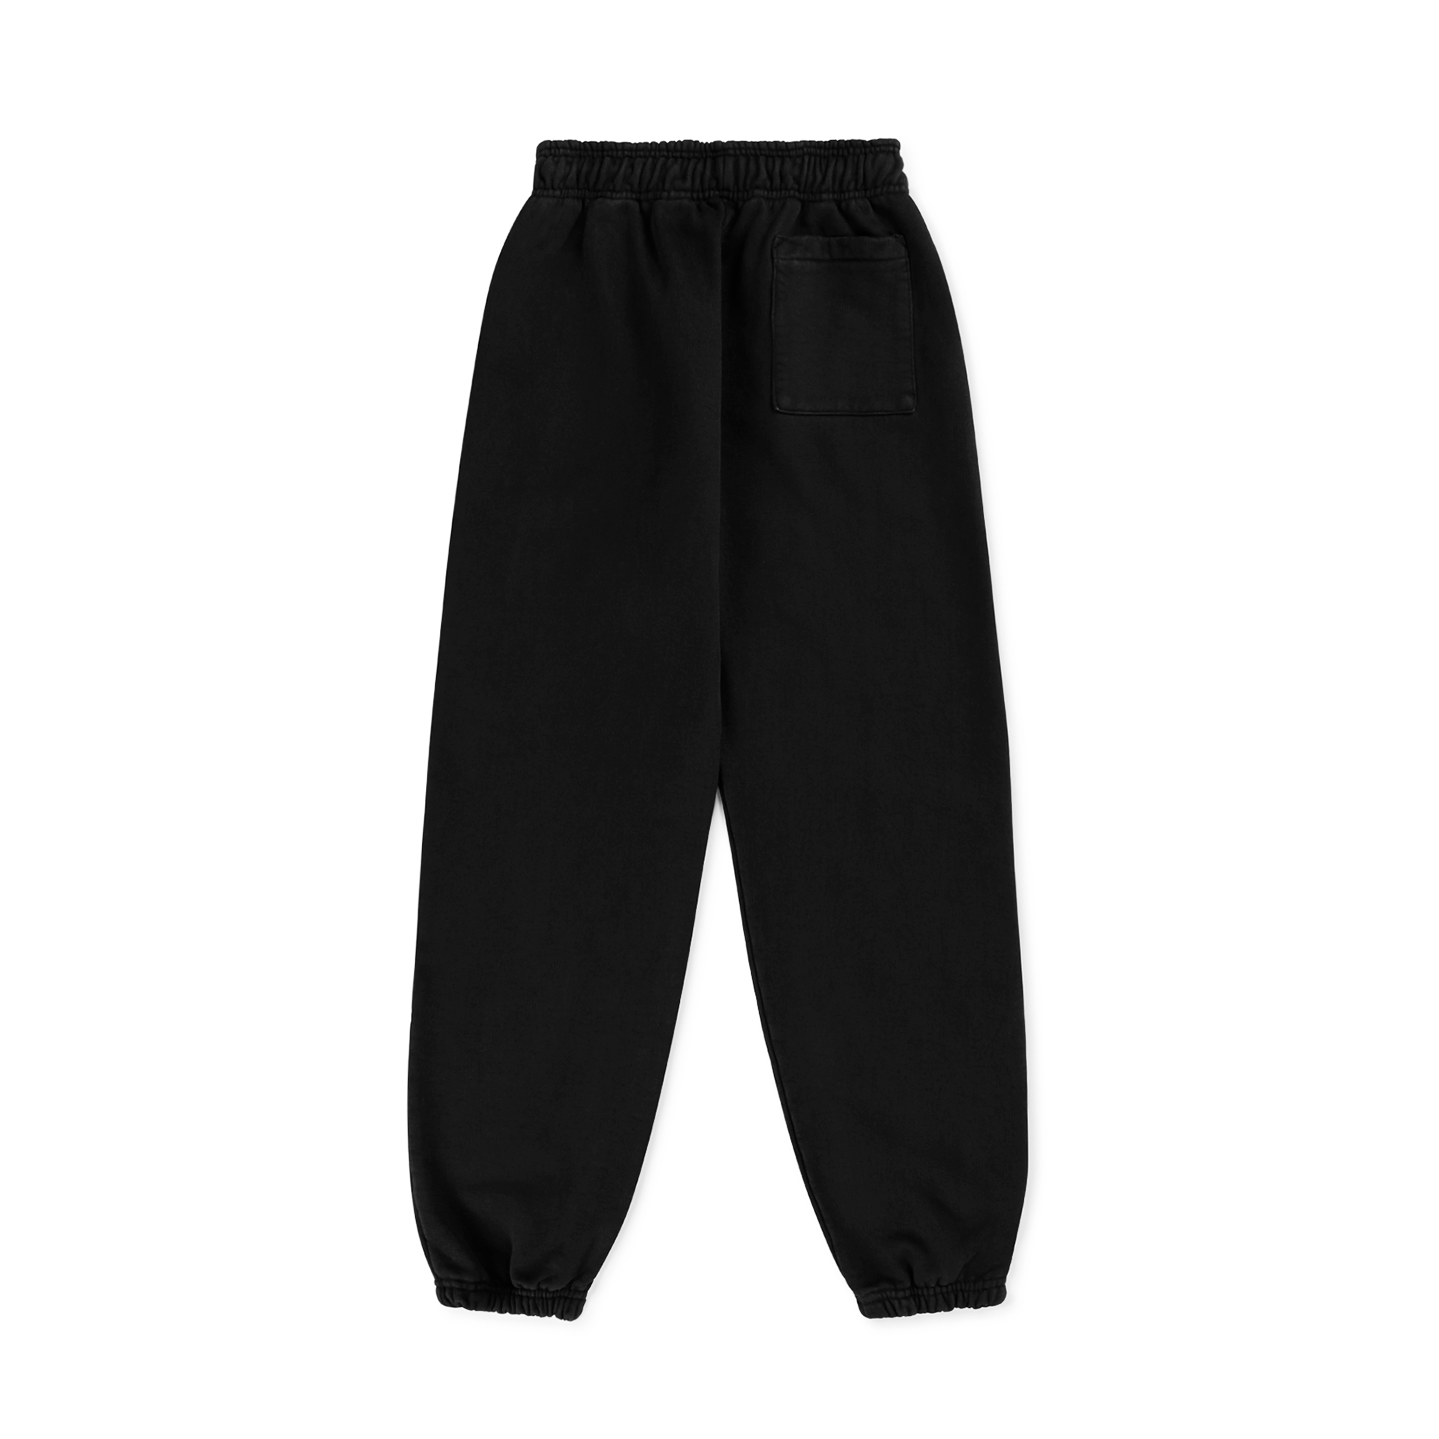 BLACK FRENCH TERRY SWEATPANTS